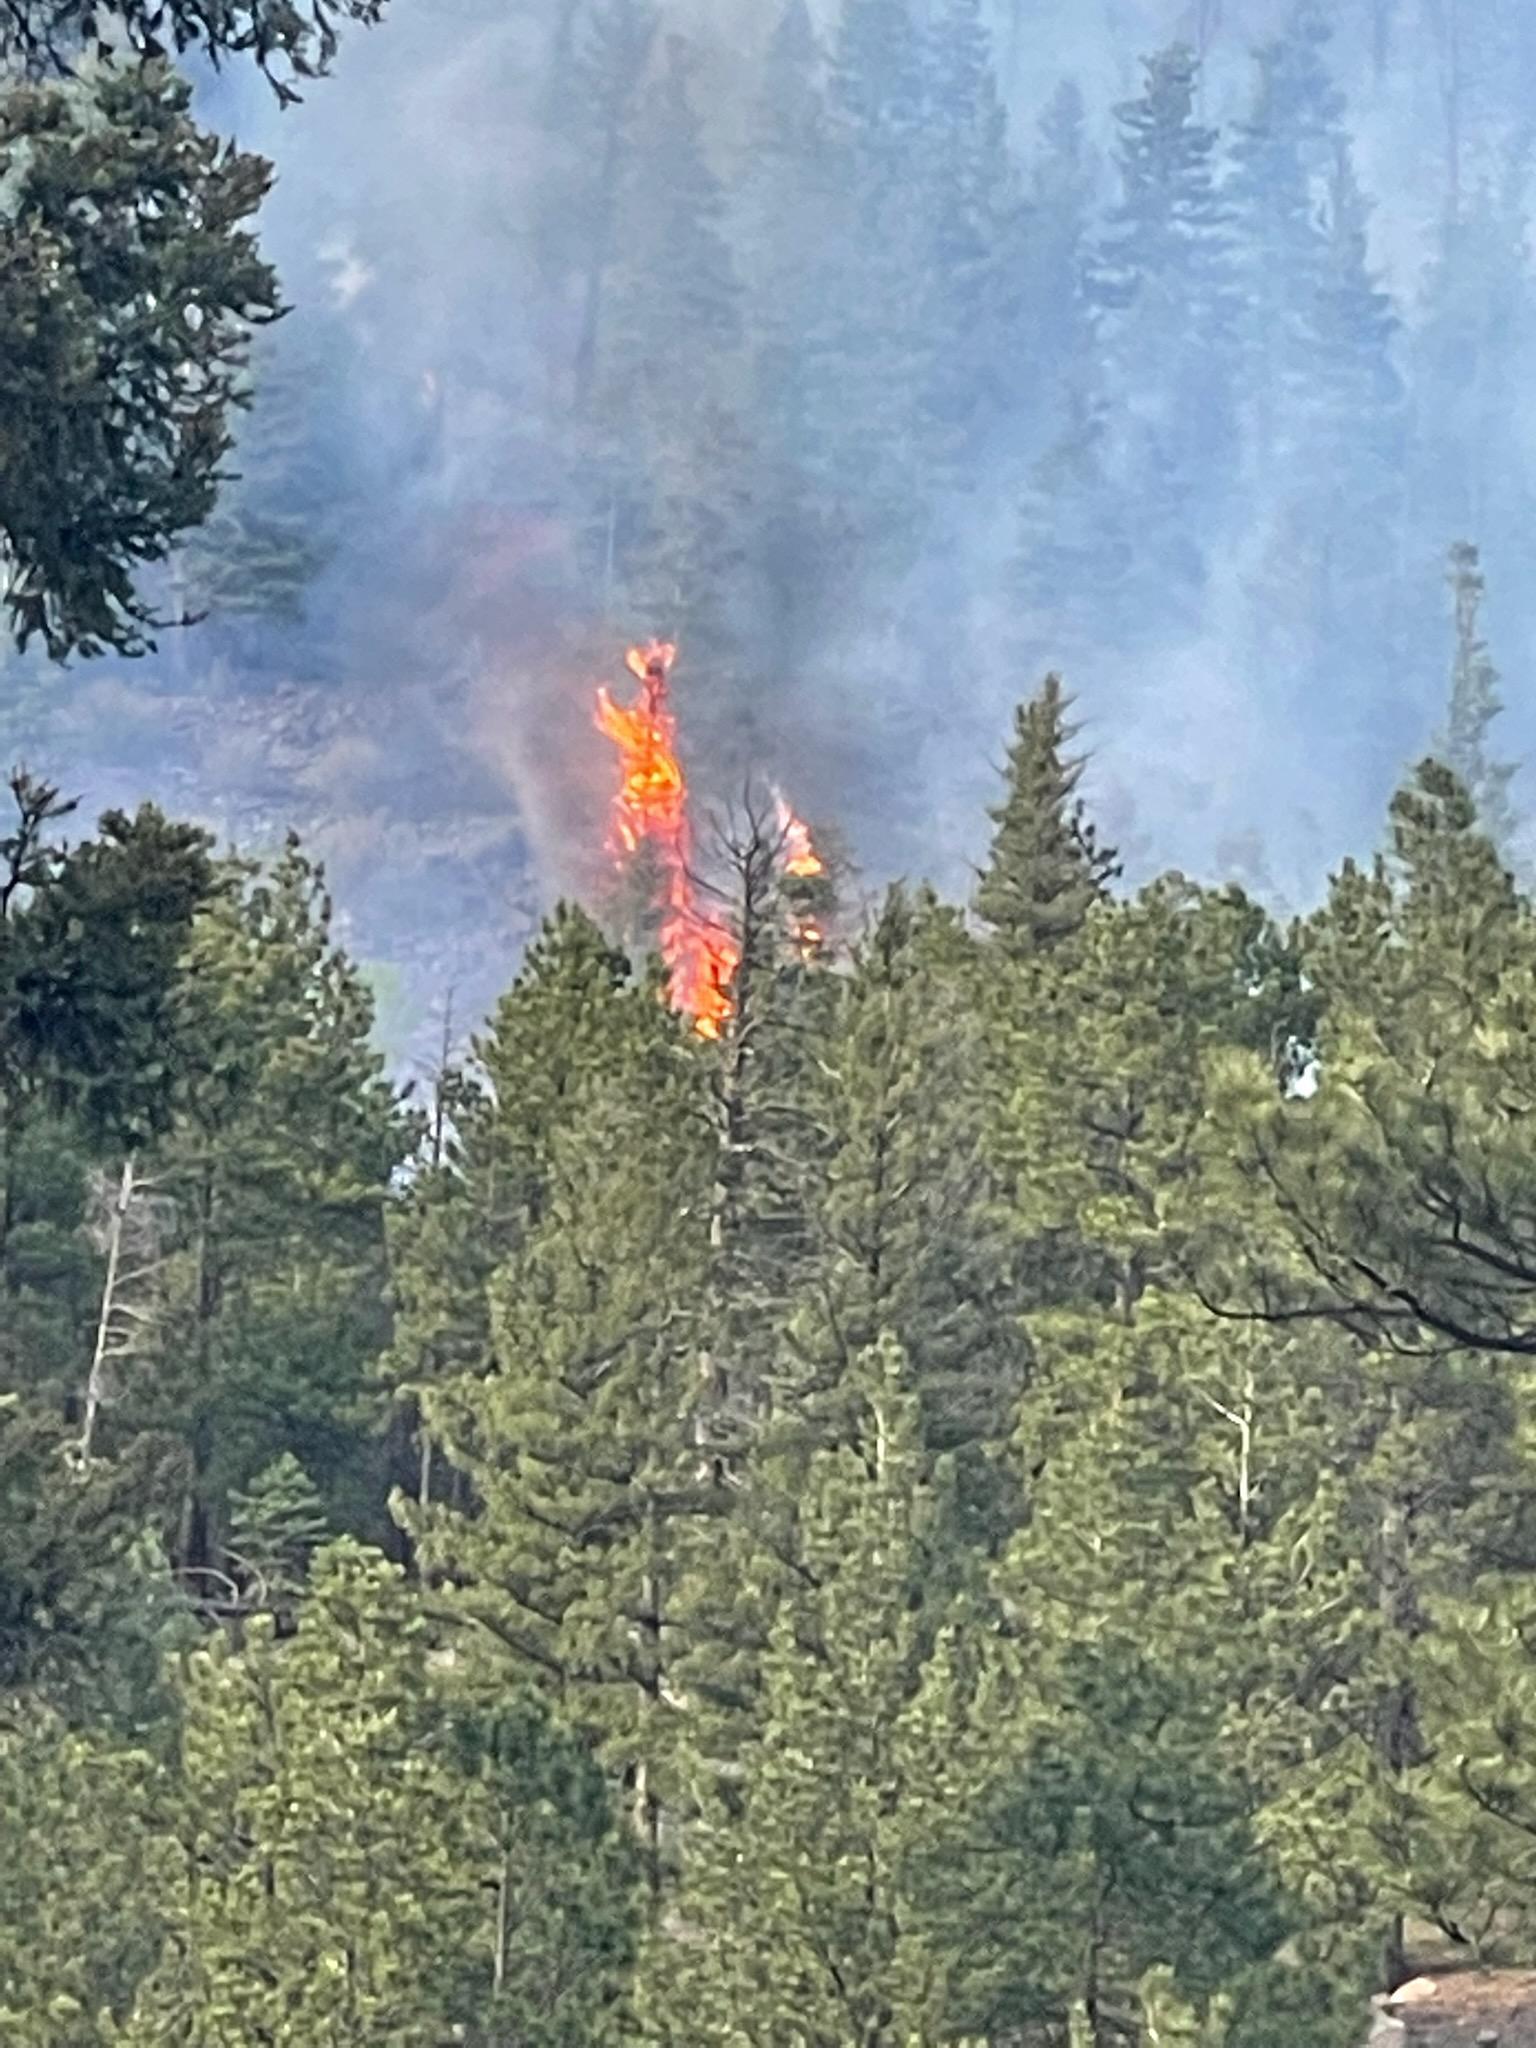 Fire comes off the top of a single tree in the midst of a forest